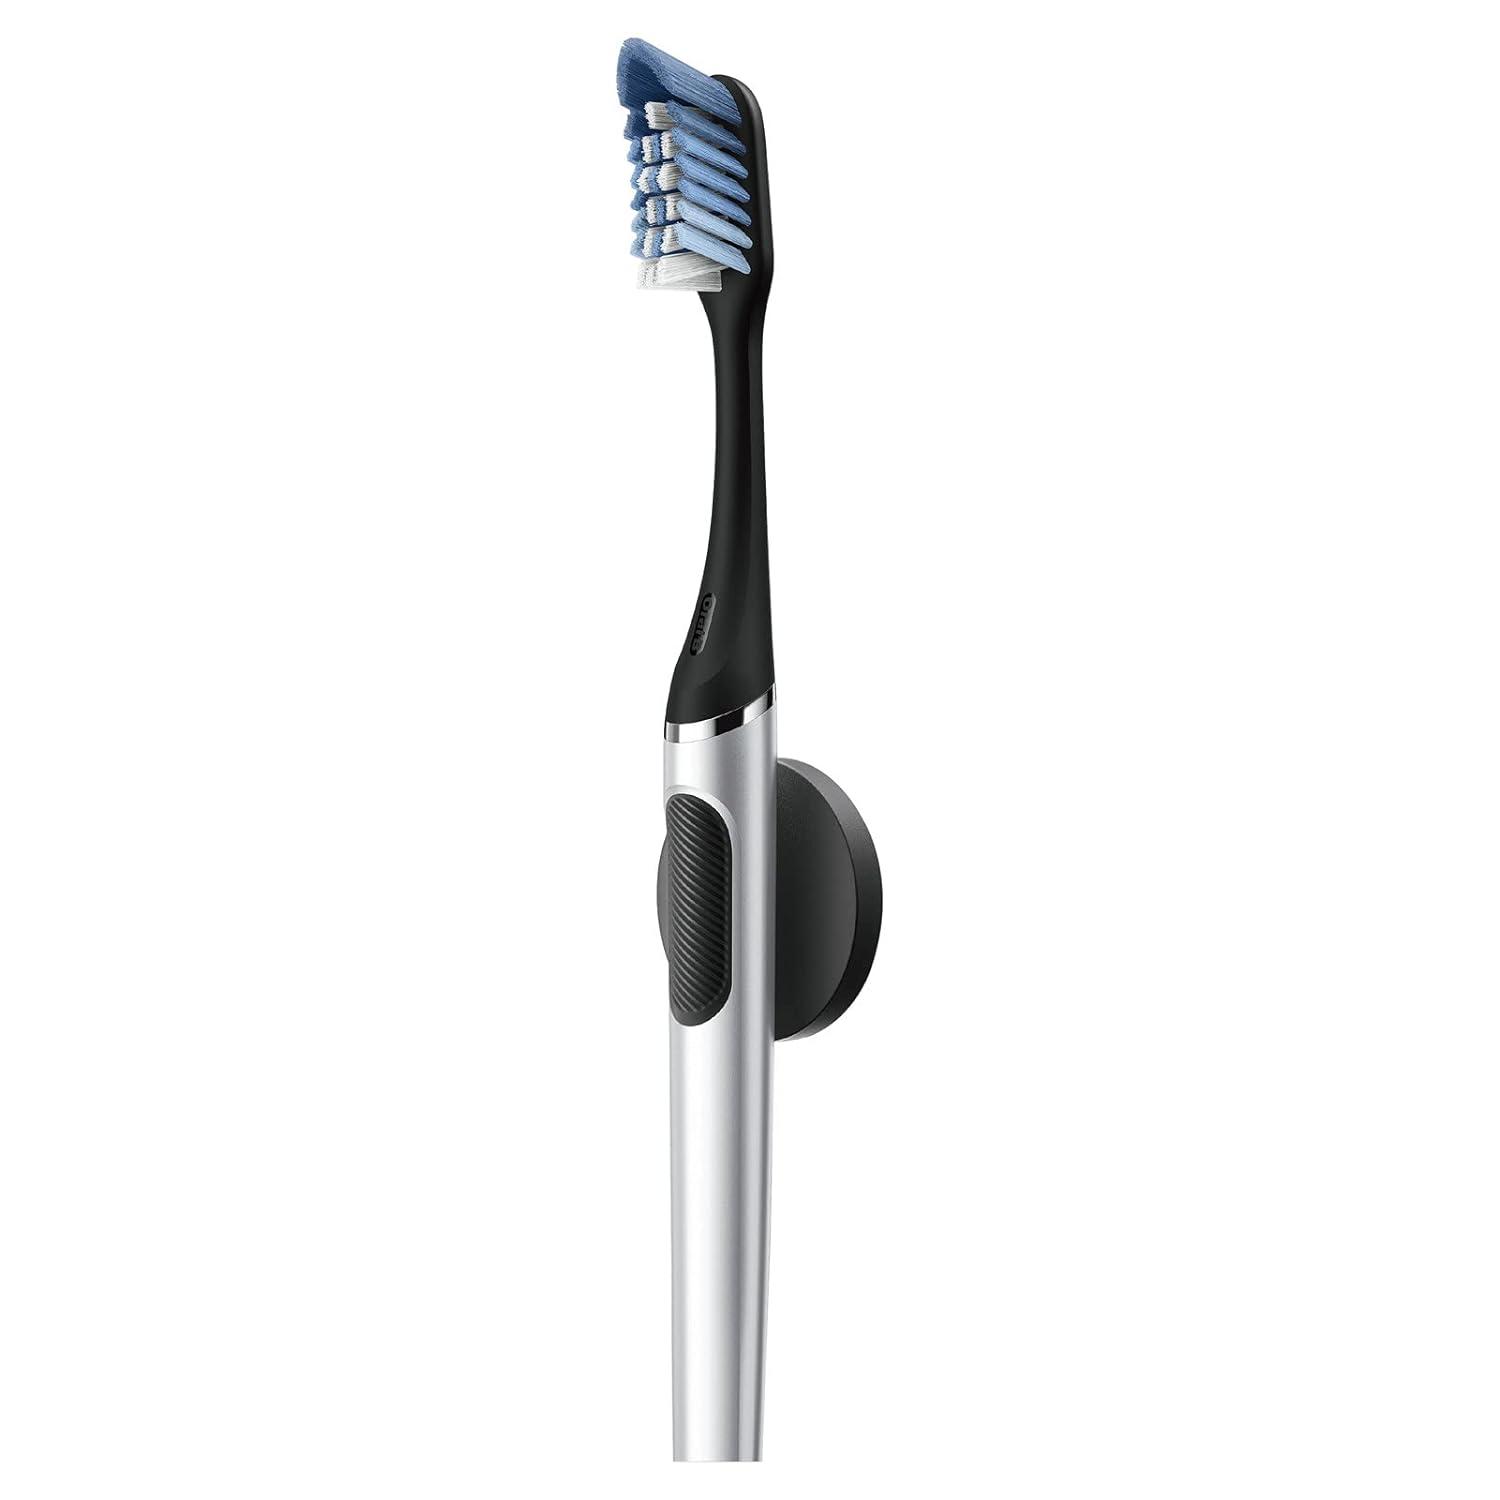 Clic Toothbrush Replacement Brush Heads, Black, 2 Count